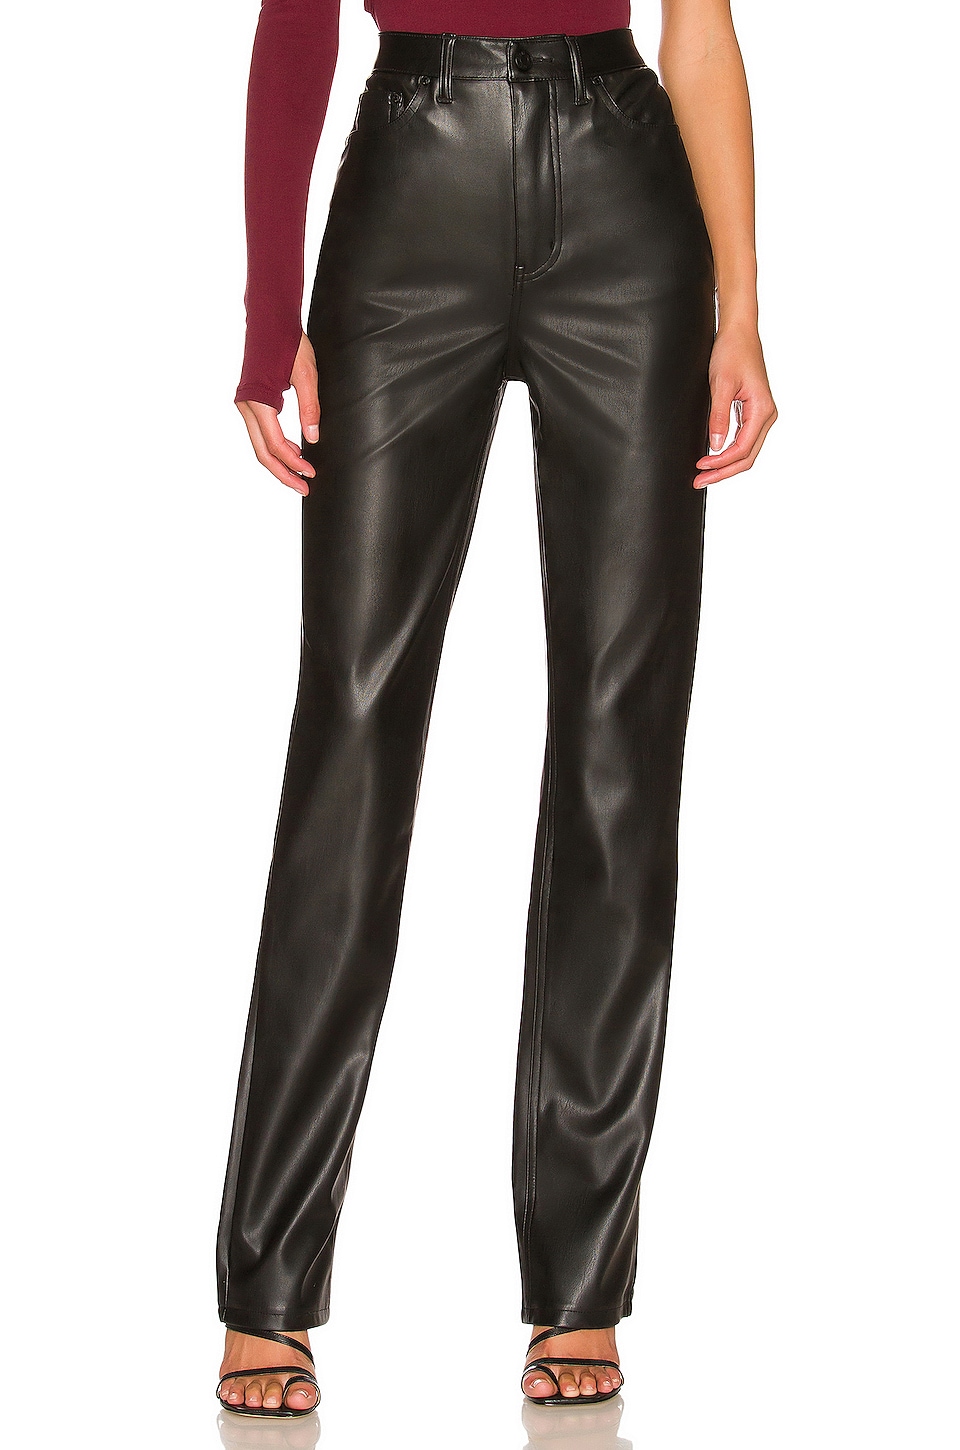 AFRM ultra low rise faux leather wide leg pants in black